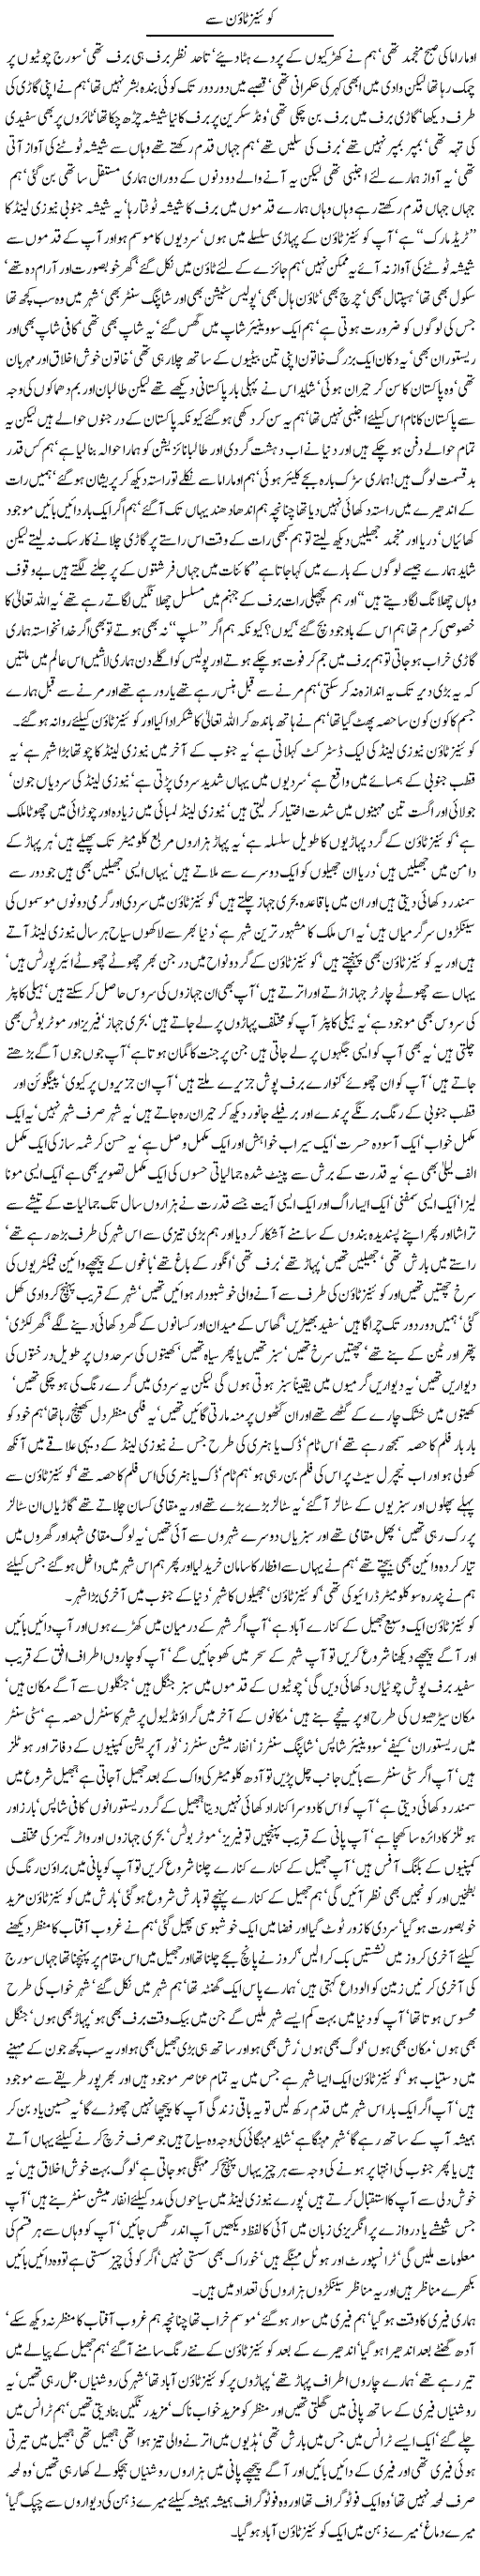 Queens Town se by Javed Chaudhry